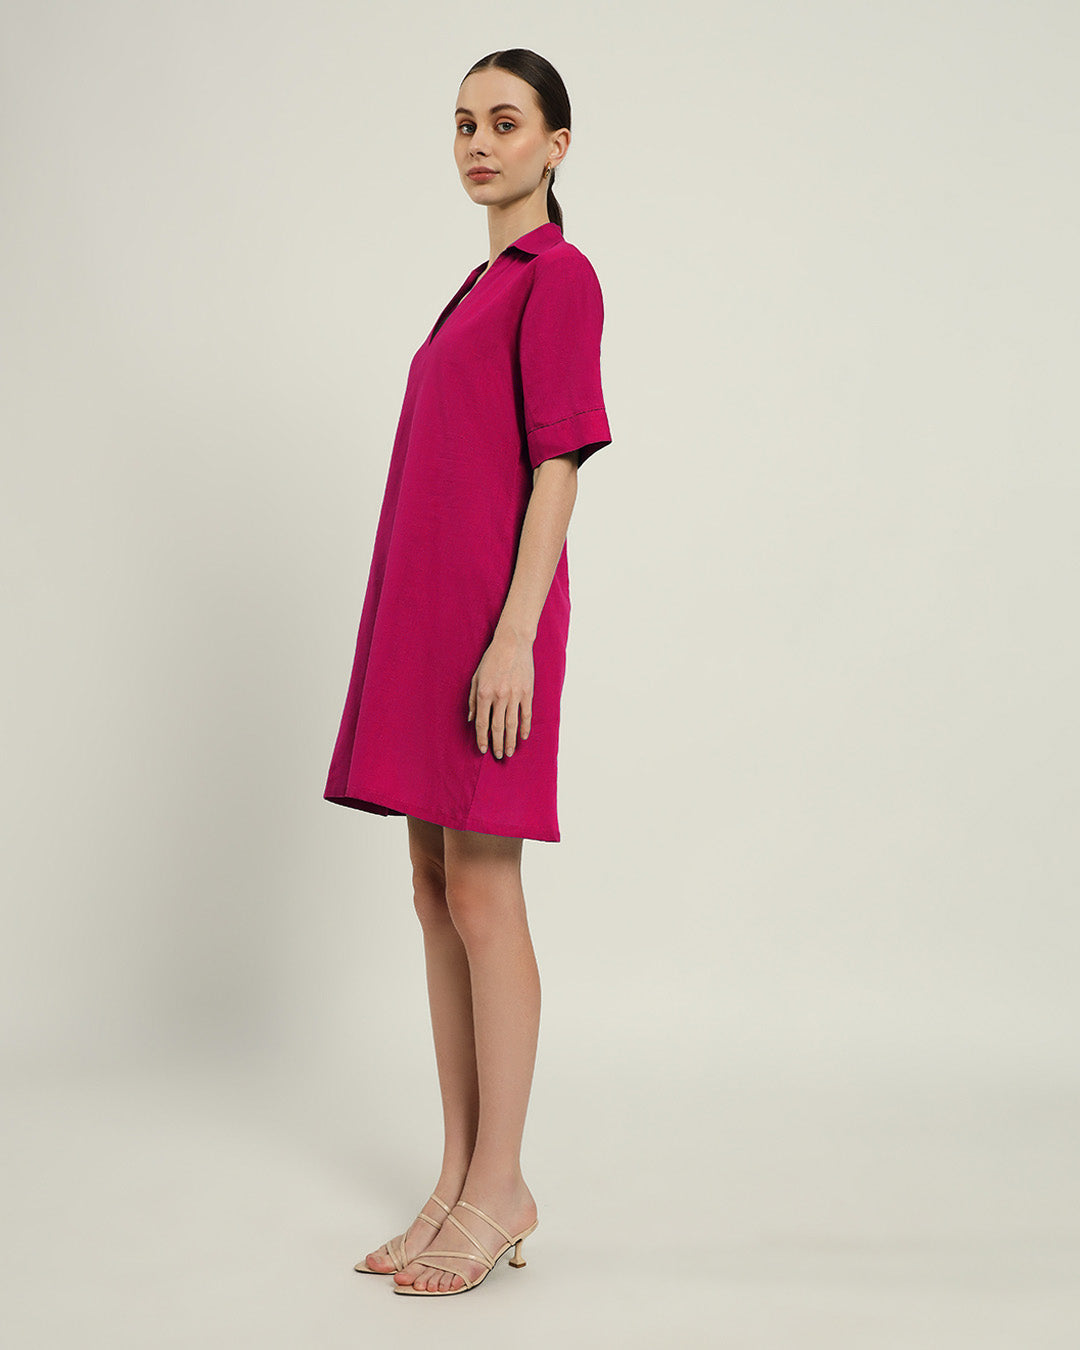 The Ermont Berry Dress